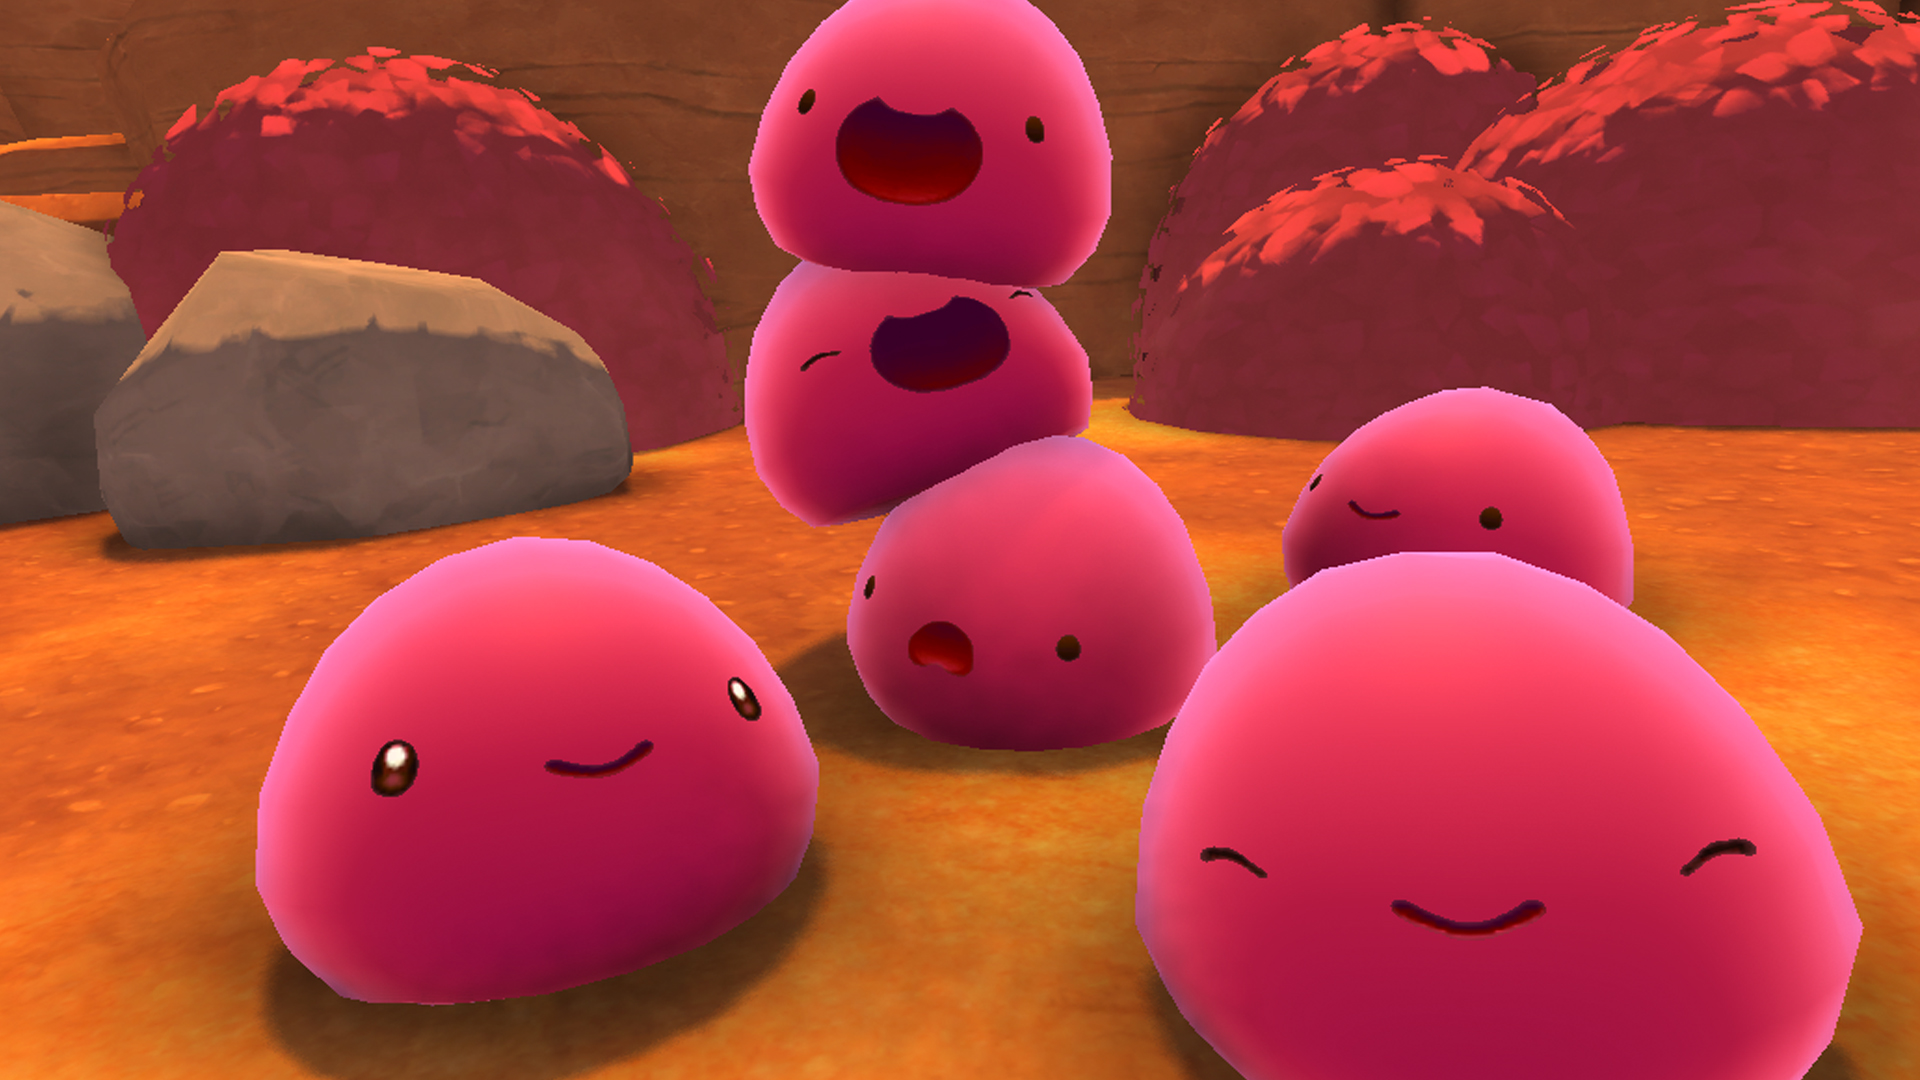 slime rancher 2 release date pc